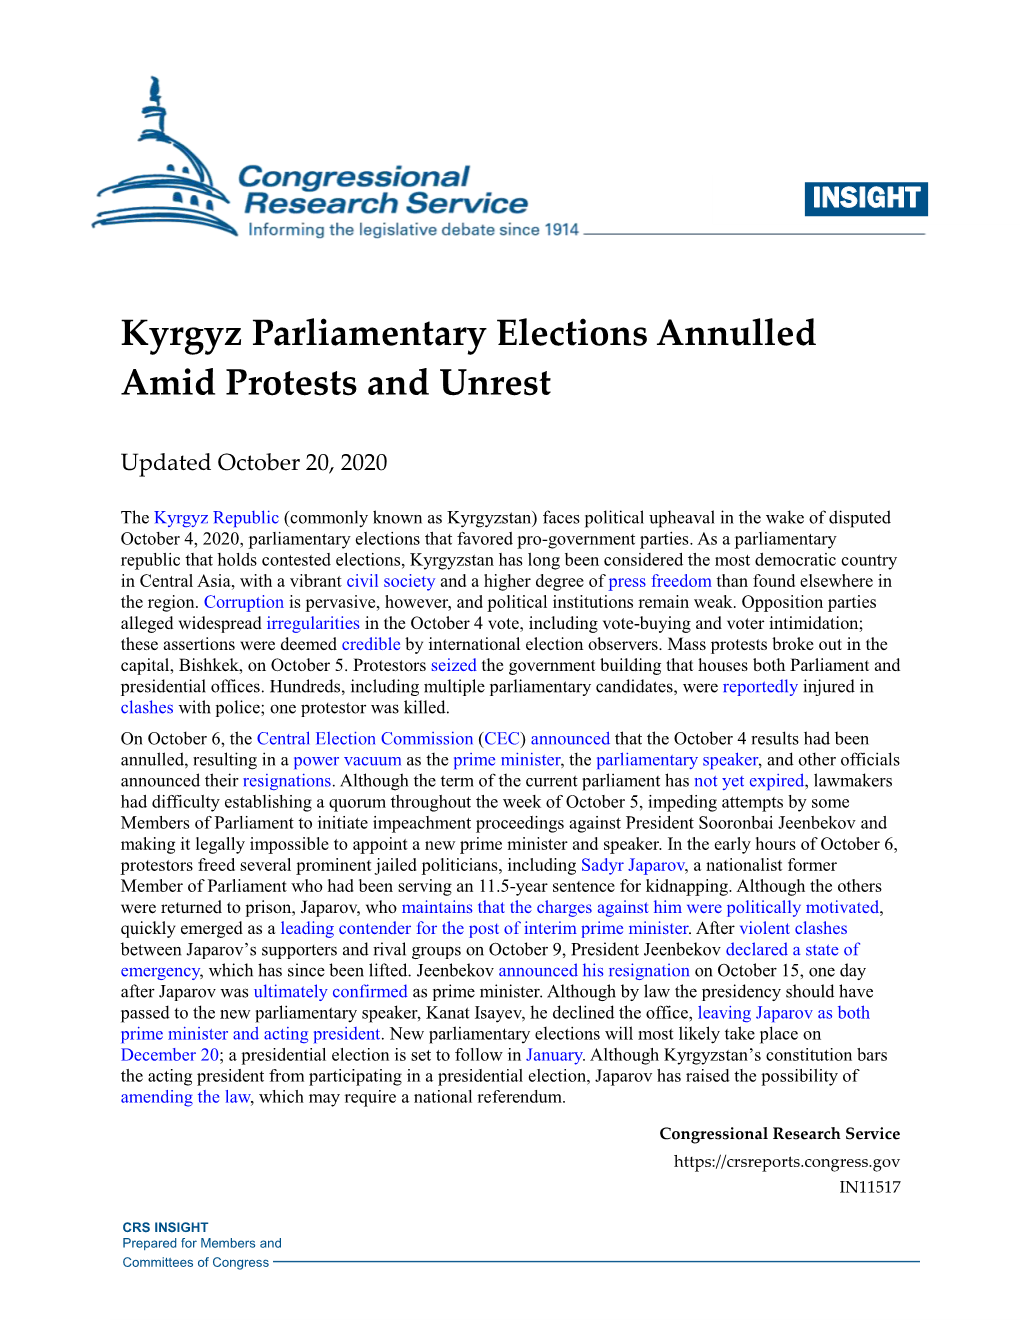 Kyrgyz Parliamentary Elections Annulled Amid Protests and Unrest